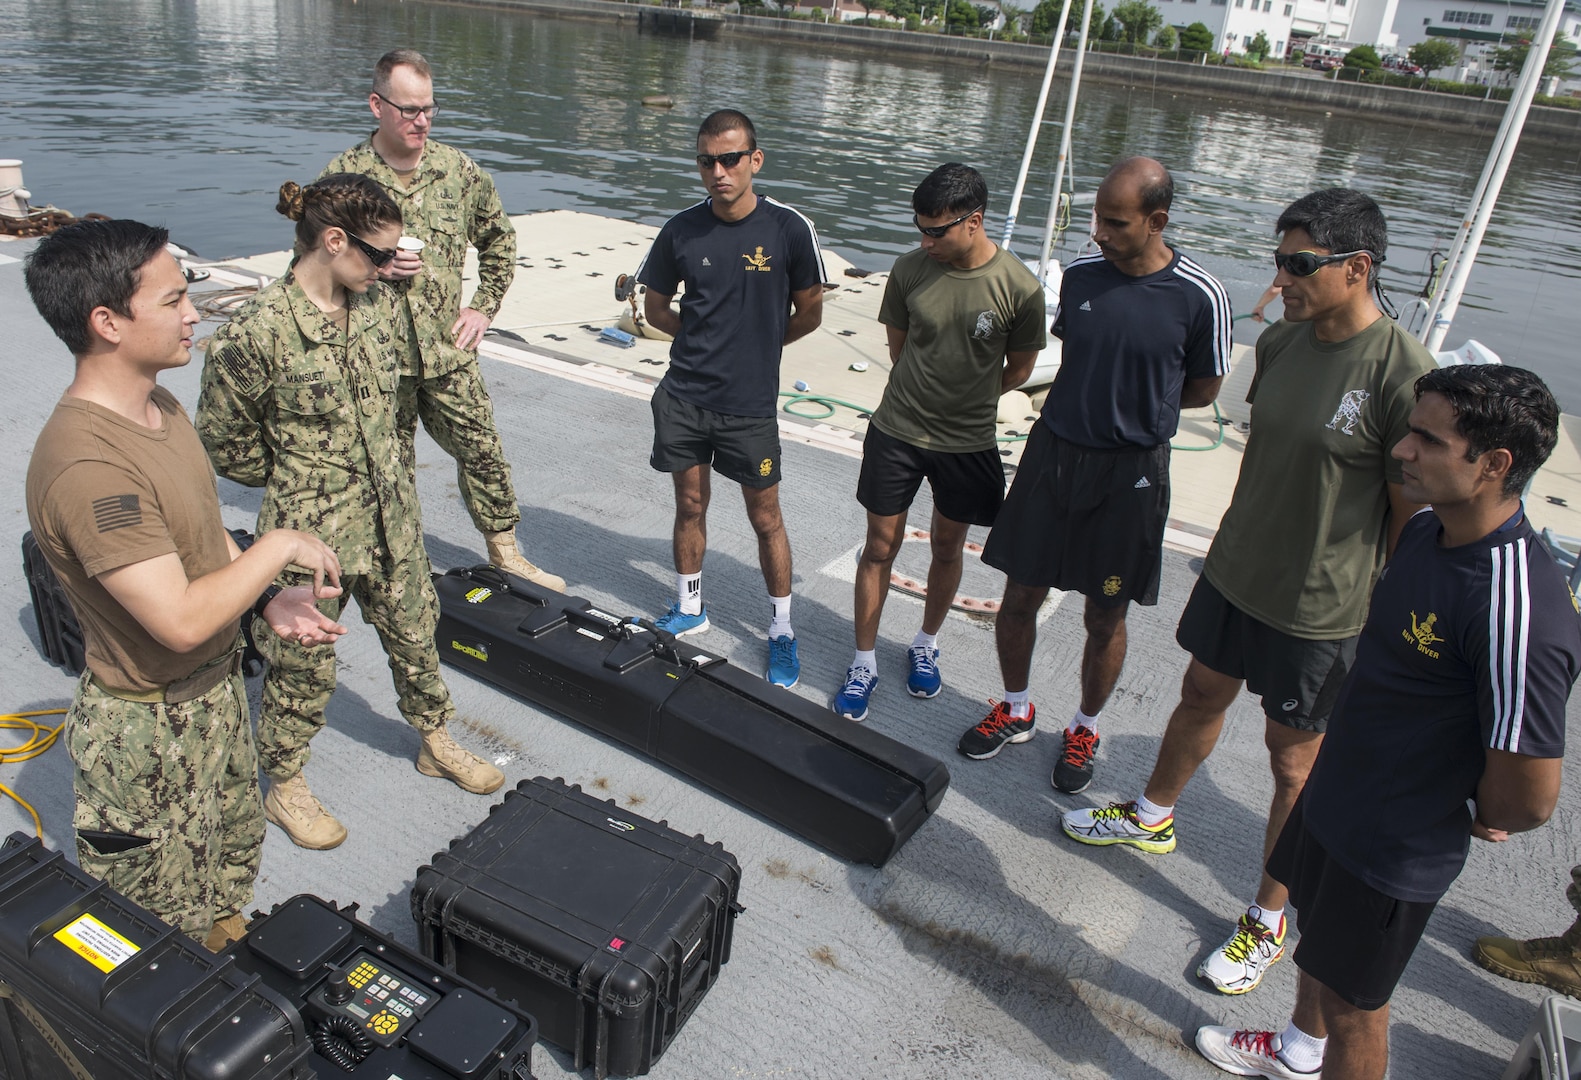 A U.S. Navy Explosive Ordnance Disposal (EOD) technician assigned to EOD Mobile Unit 11 explains an unmanned underwater vehicle system to Indian EOD technicians during exercise Malabar 2016. A trilateral maritime exercise, Malabar is designed to enhance dynamic cooperation between the Indian Navy, Japan Maritime Self-Defense Force (JMSDF) and U.S. Navy forces in the Indo-Asia-Pacific. (U.S. Navy combat camera photo by Mass Communication Specialist 1st Class Charles E. White/Released)